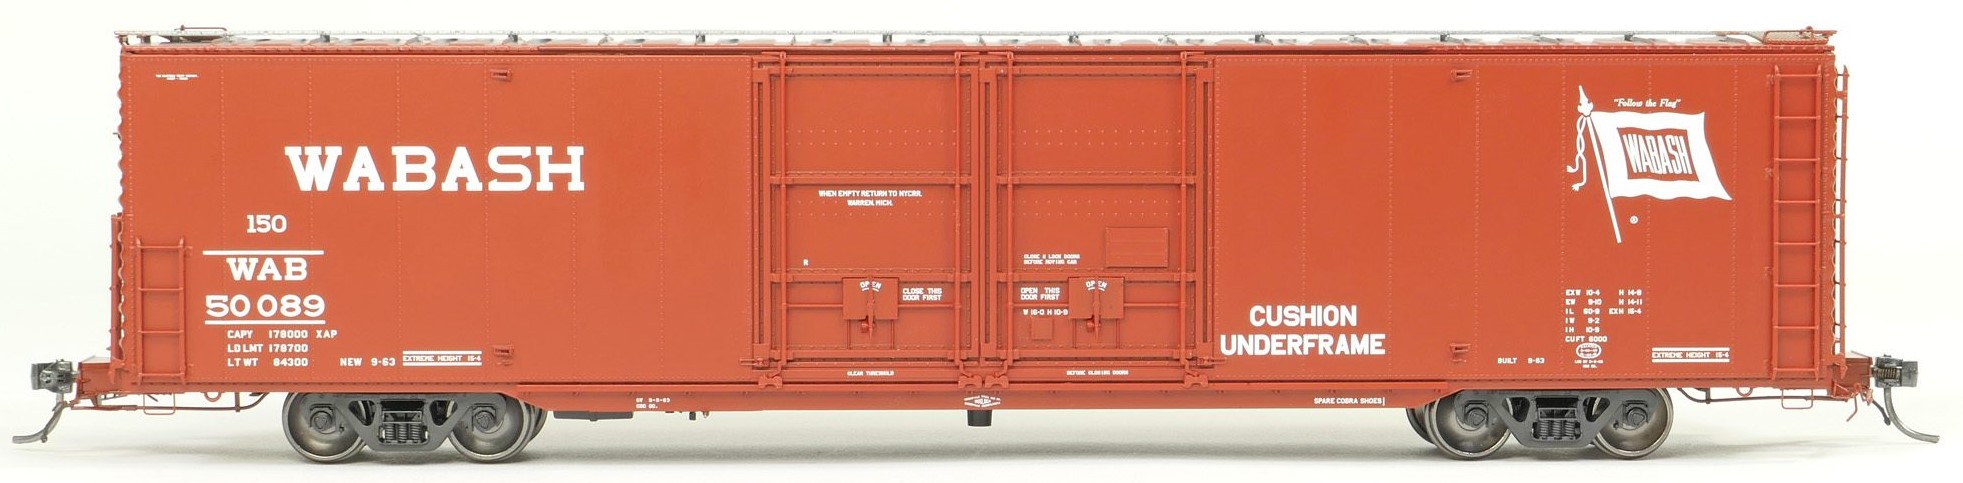 Tangent Scale Models HO 33013-03 Greenville 6,000CuFt 60' Double Door Box Car Wabash 'Delivery Red 9-1963' WAB #50085